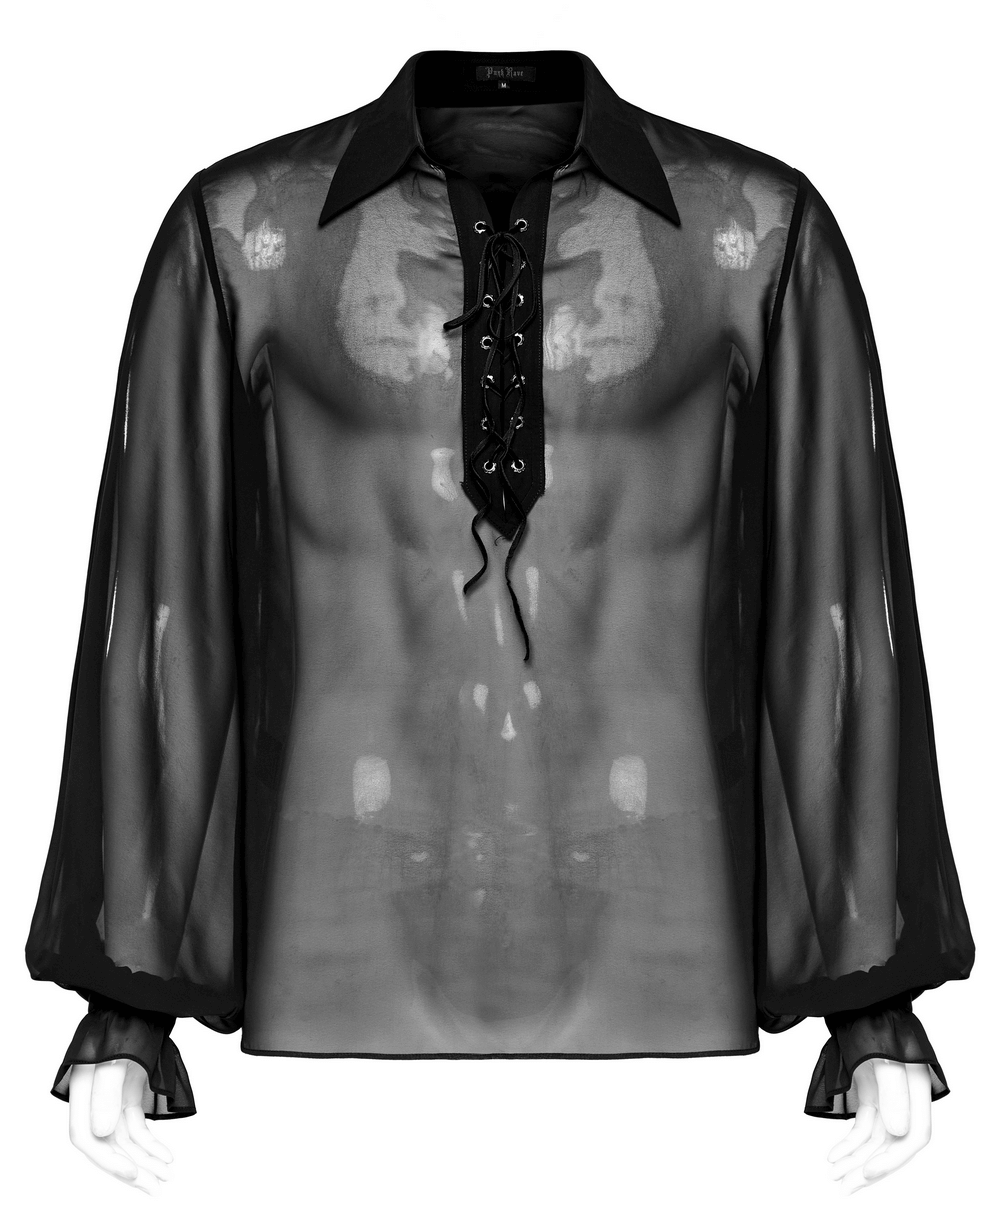 Men's Gothic Shirt: Sheer Chiffon with Lace-Up Front